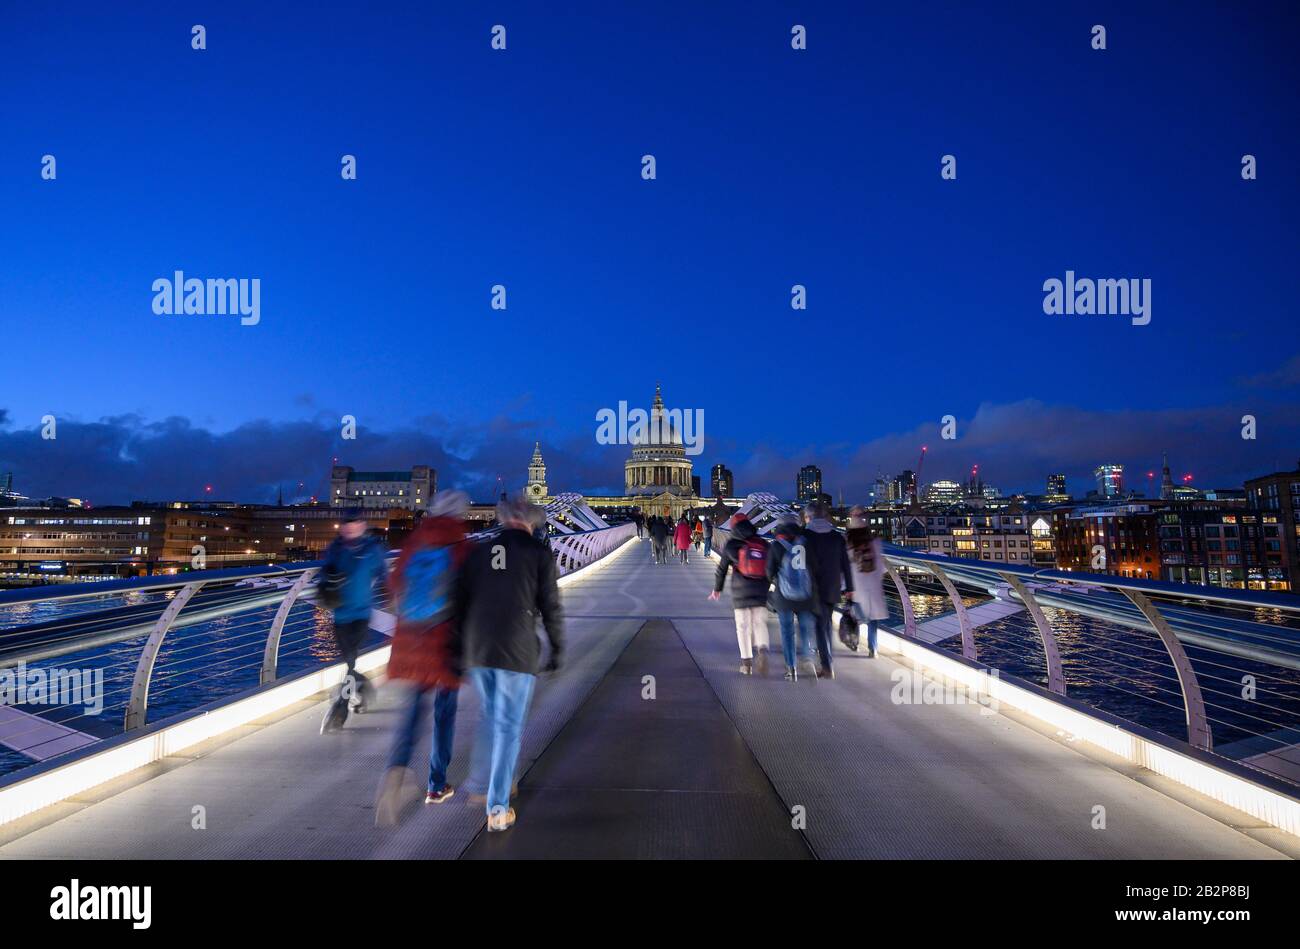 Night view of the Millennium Bridge and St Paul's Cathedral in London, UK. Unrecognisable people walk across the bridge (motion blur). Stock Photo